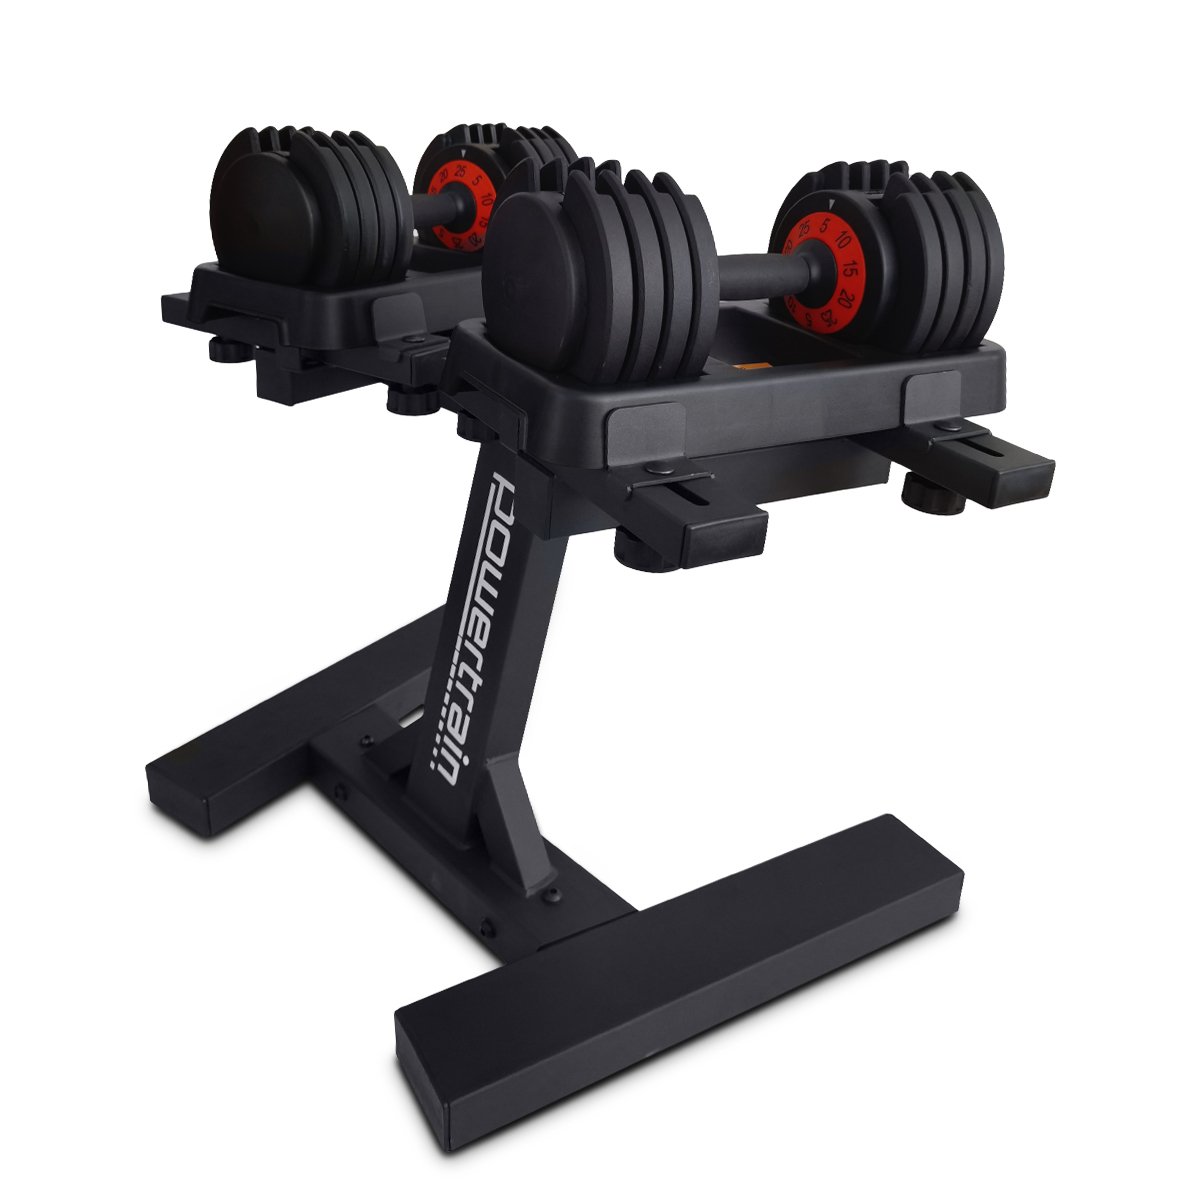 Powertrain GEN2 Pro Adjustable Dumbbell Set - 2 x 25kg (50kg) Home Gym Weights with Stand 1